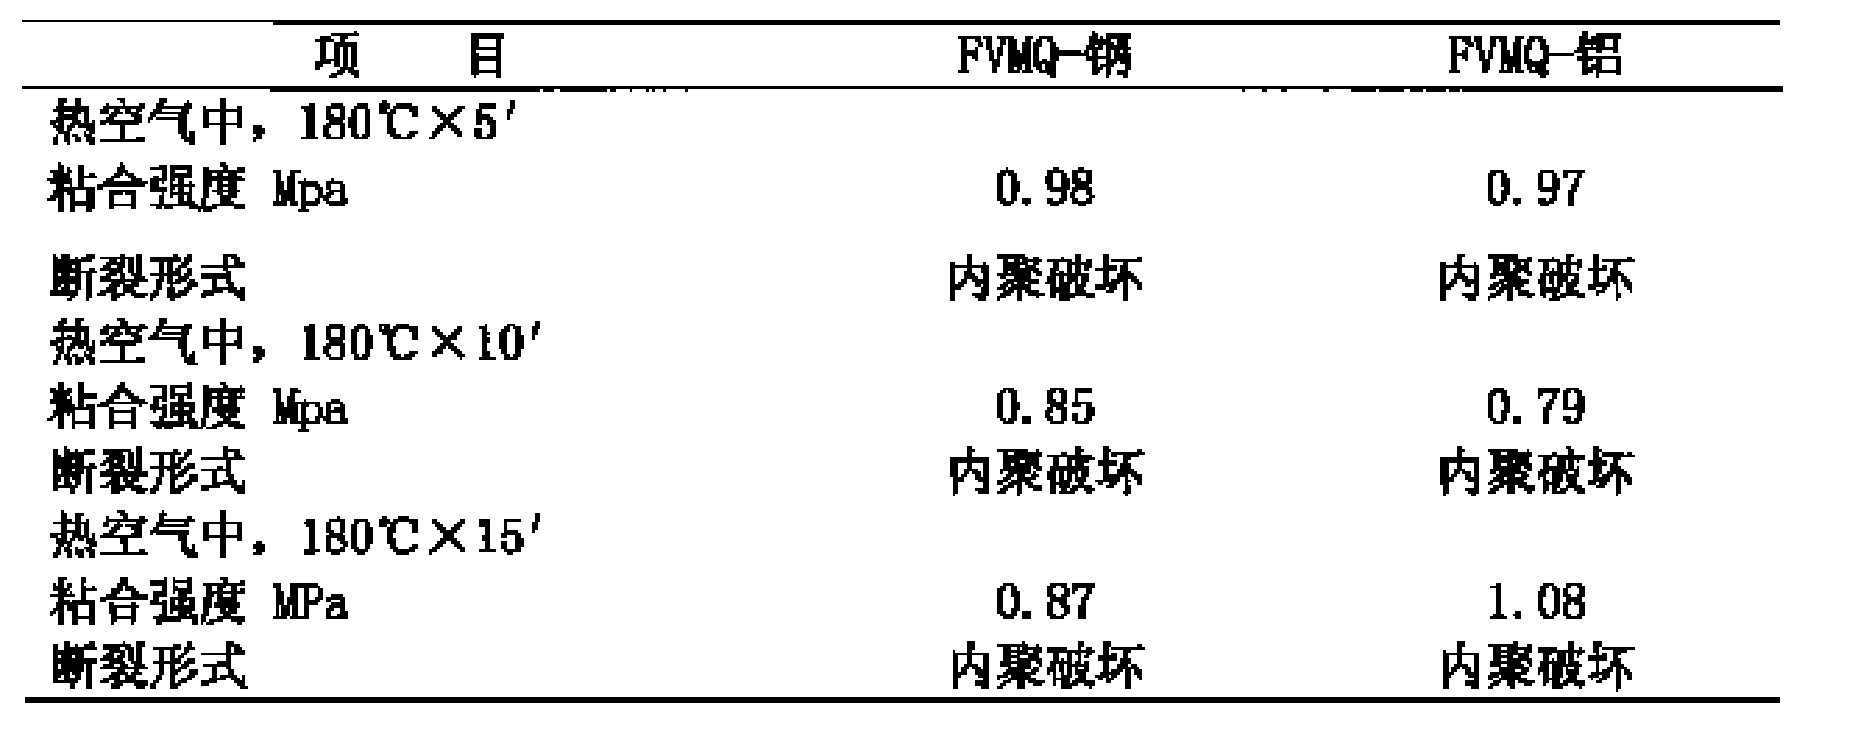 Bonding adhesive for bonding fluorocarbon silicone rubber with metals and preparation method thereof